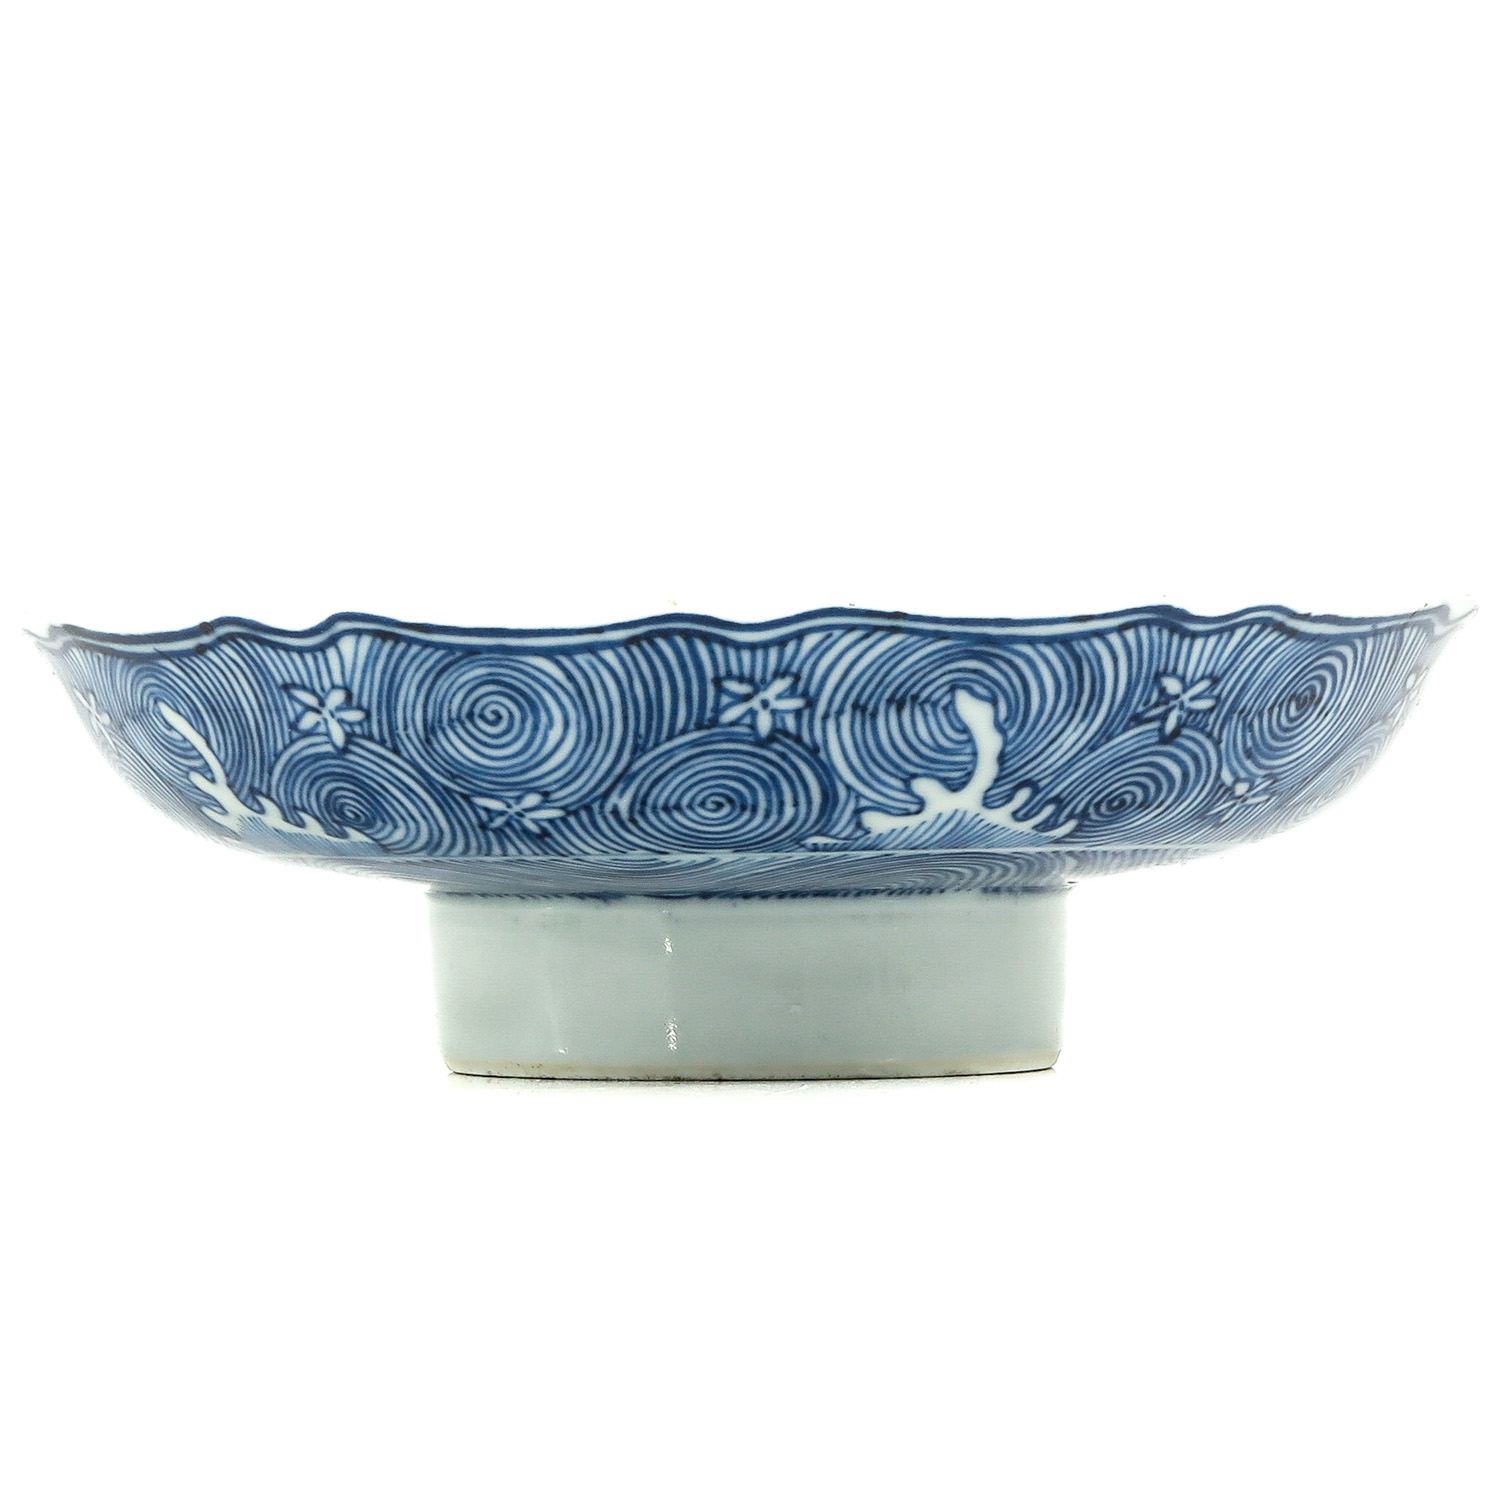 A Blue and White Stem Bowl - Image 3 of 10